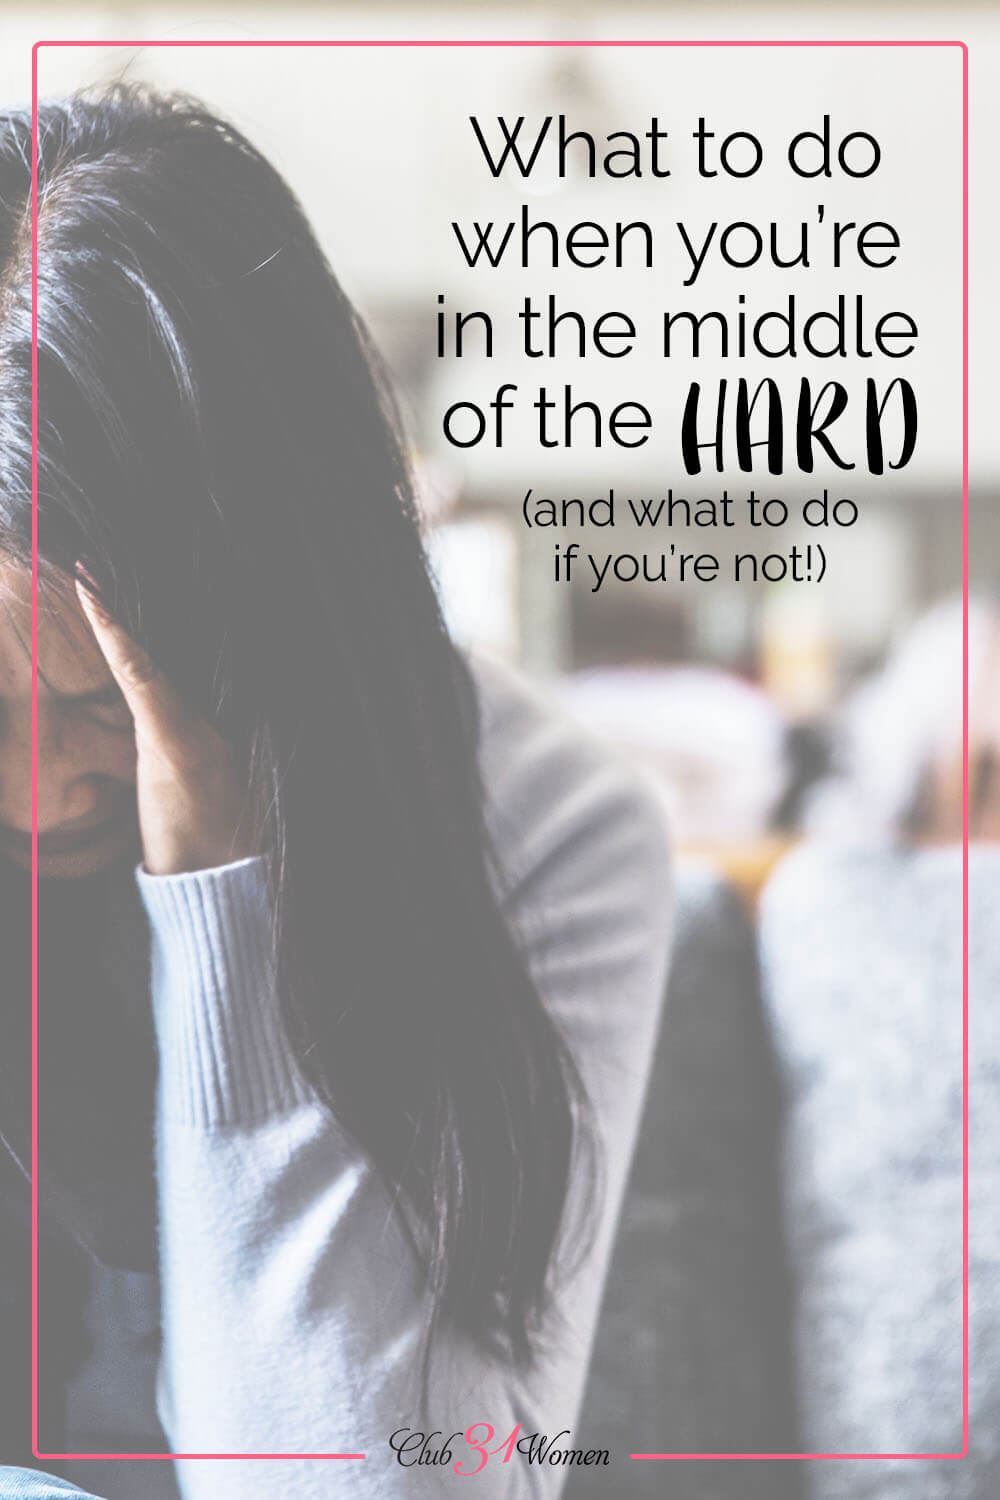 No one likes going through hard times but what if we used them to really feel that challenge and lean into God and trust Him? via @Club31Women